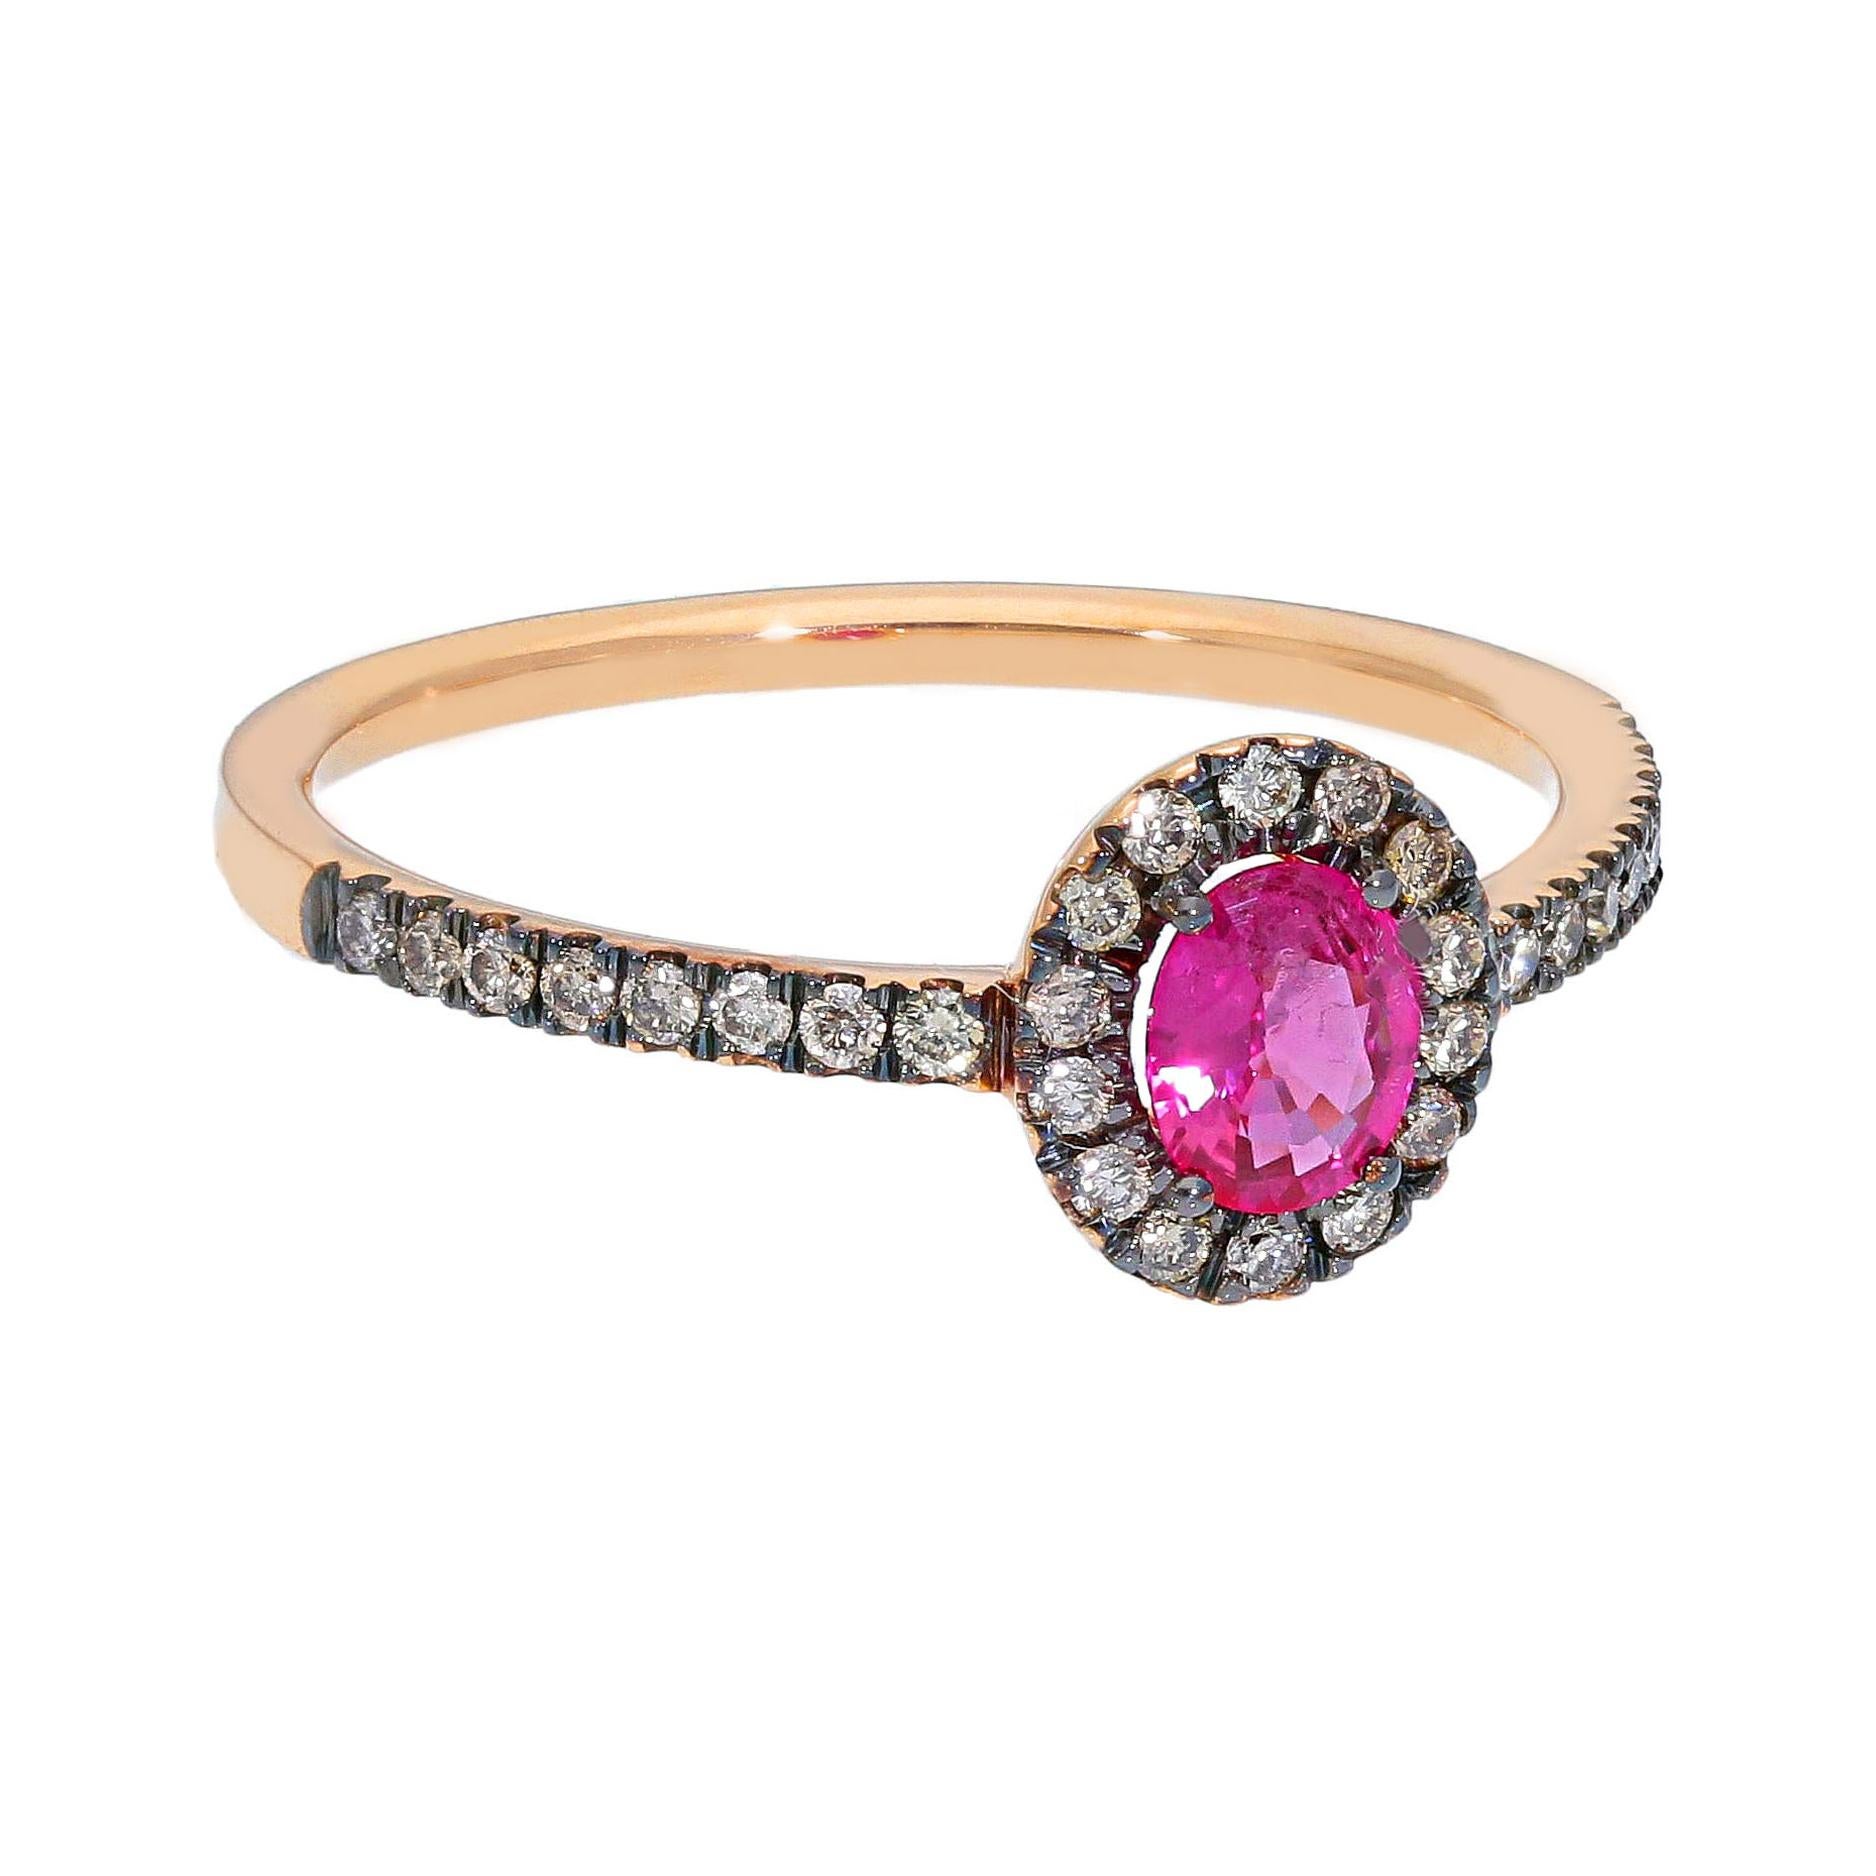 For Sale:  18K Rose & Black Gold Pradera Colourful Engagement Ring w/Rubys & Brown Diamonds 2